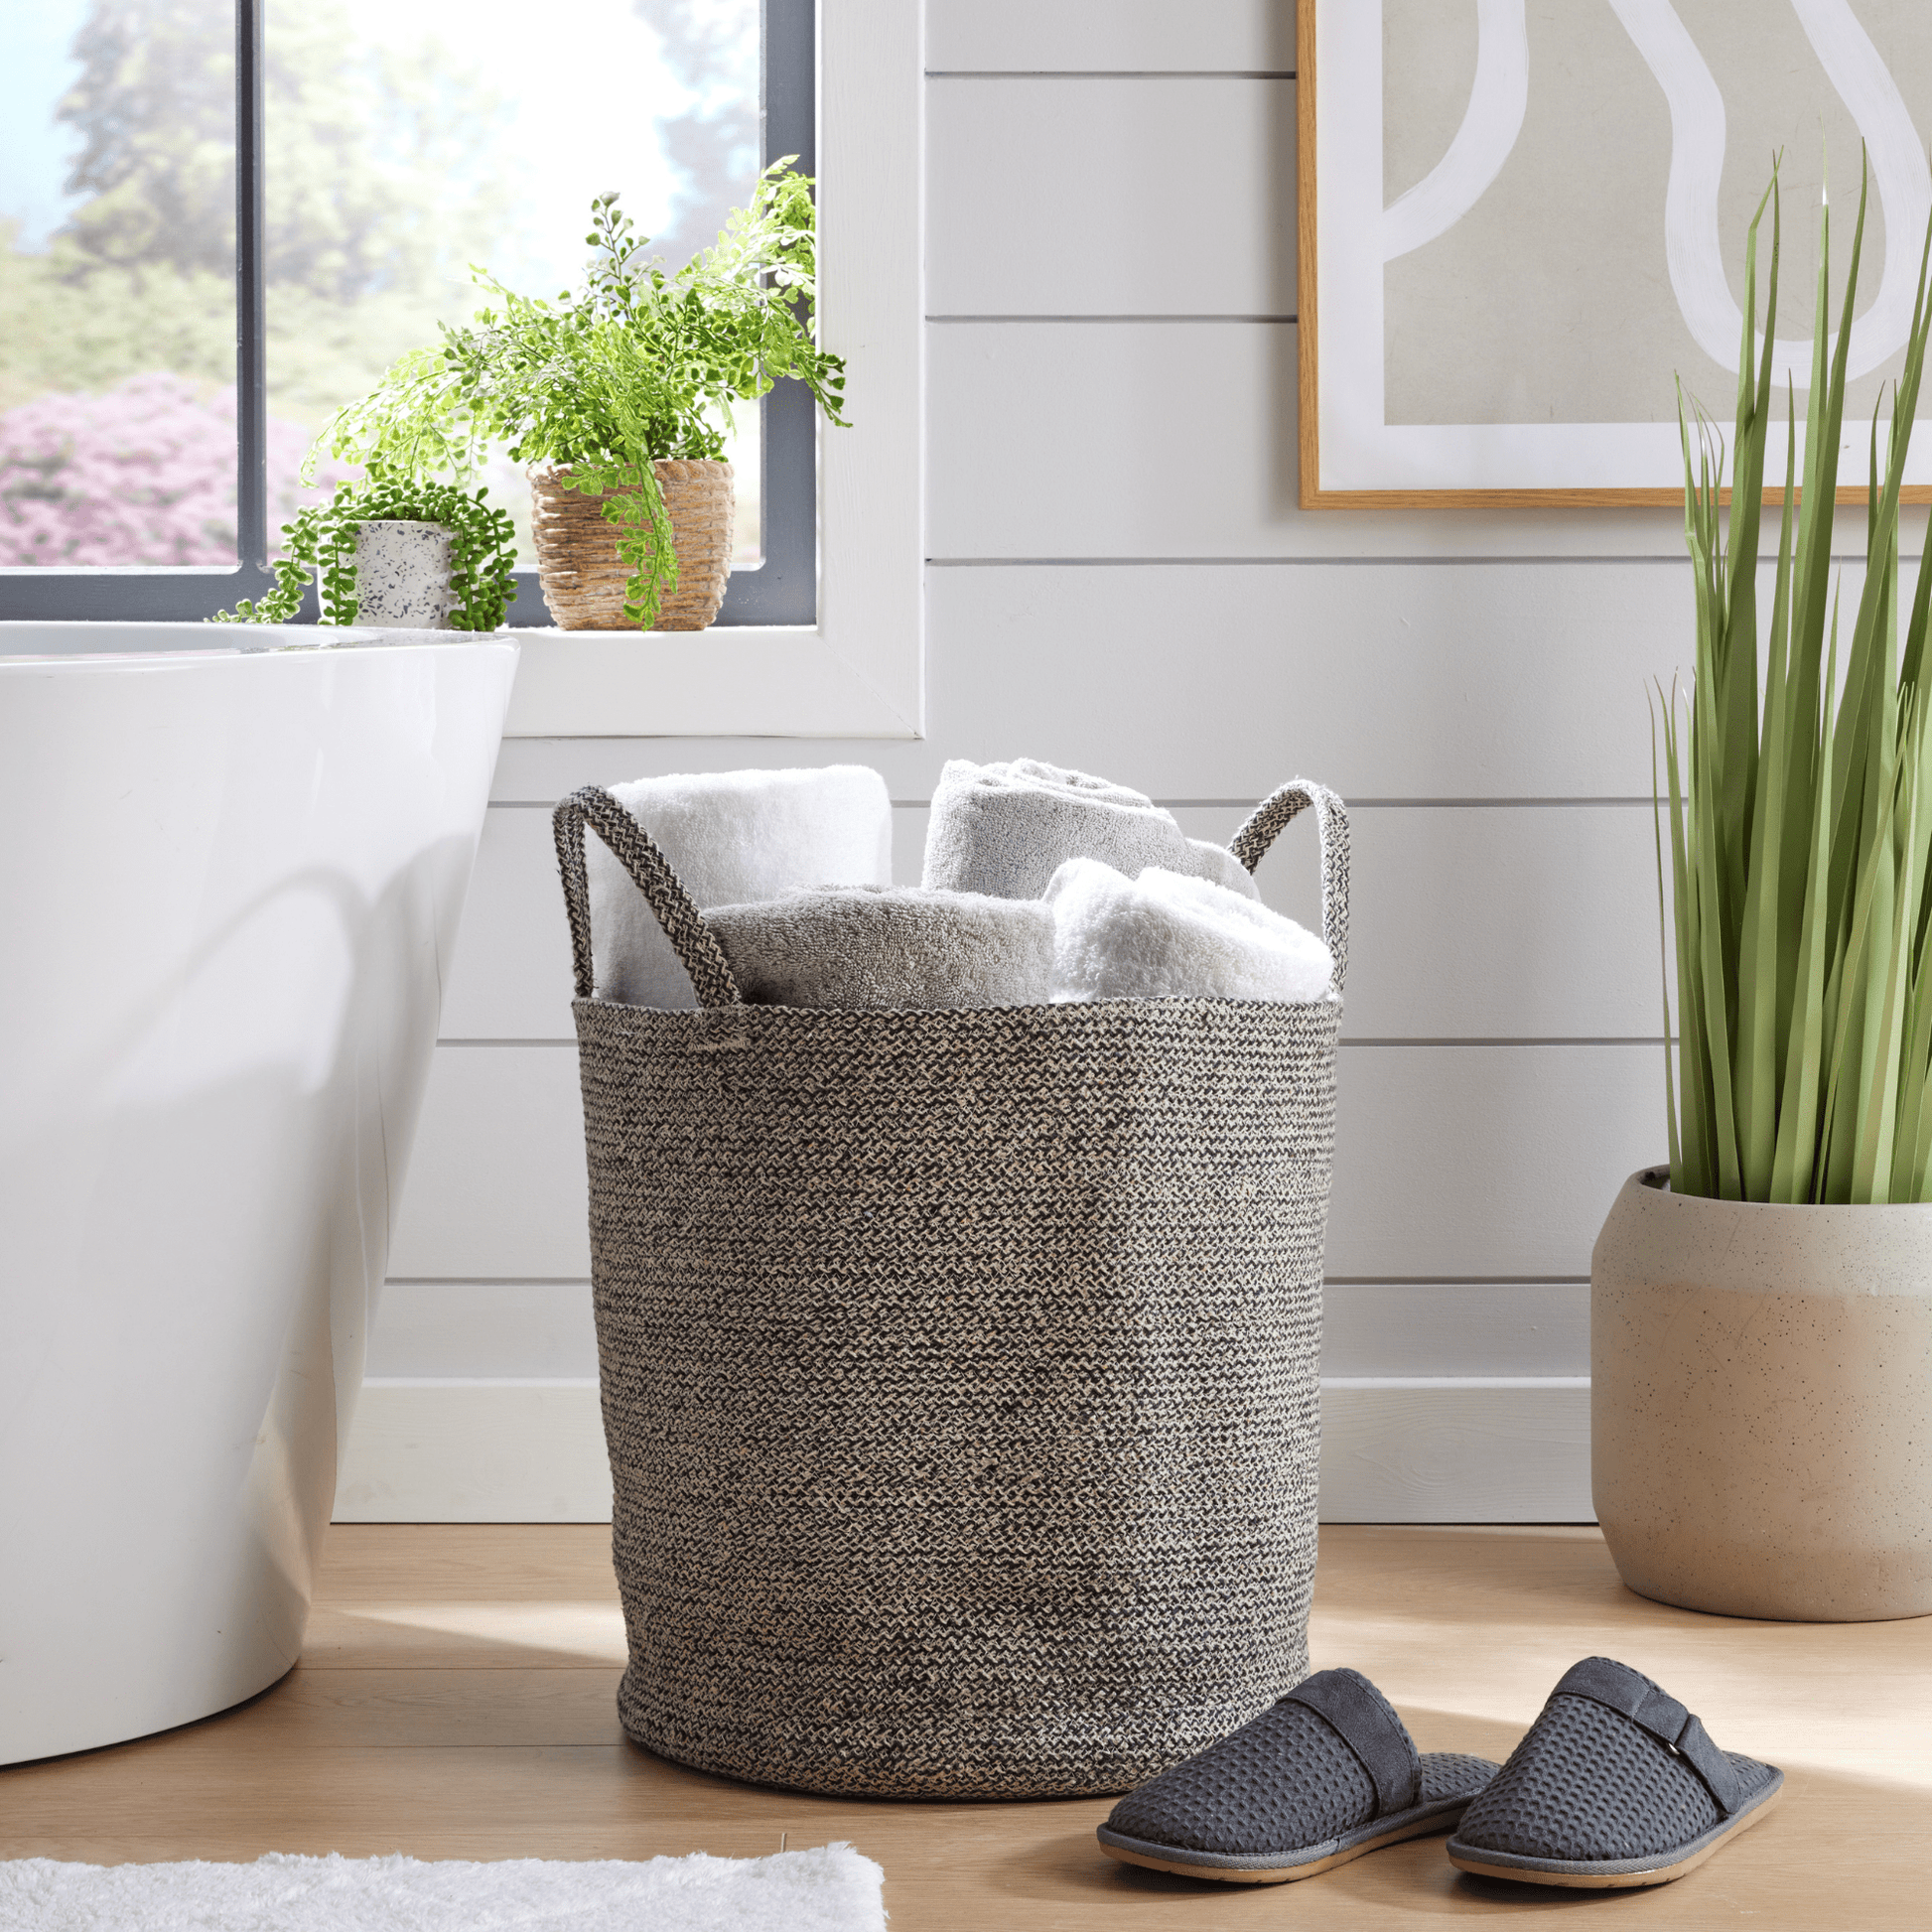 Cotton Laundry Baskets Storage Container with Handle GREY OLIVIA ROCCO Laundry Basktets